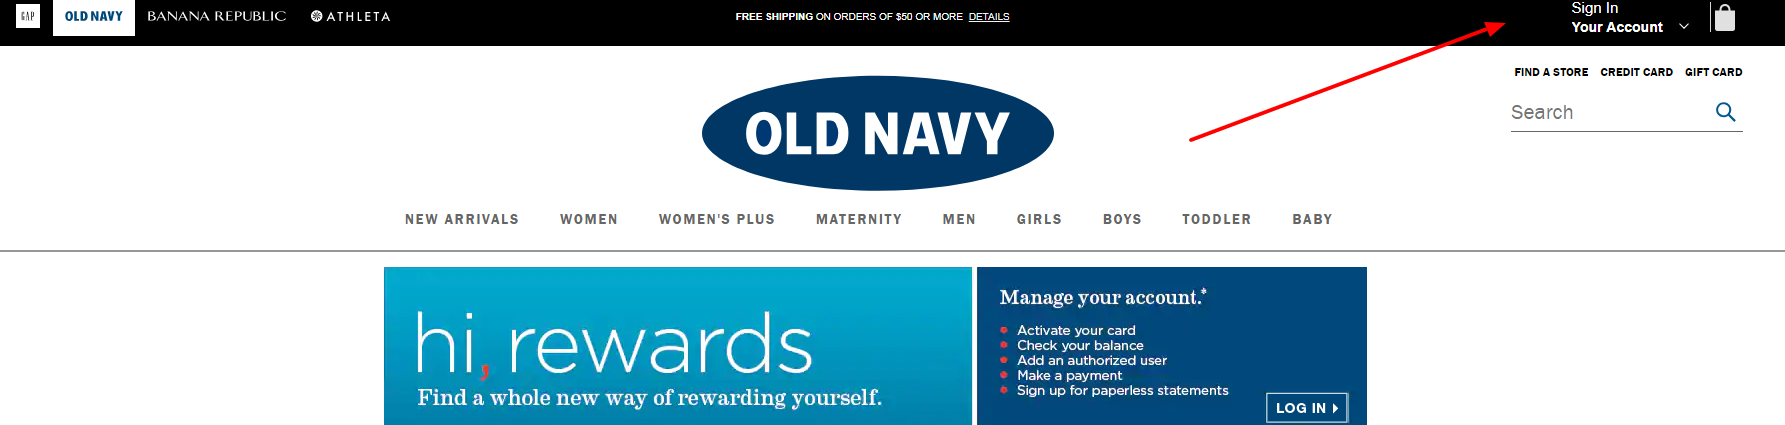 log in to your old navy credit card account